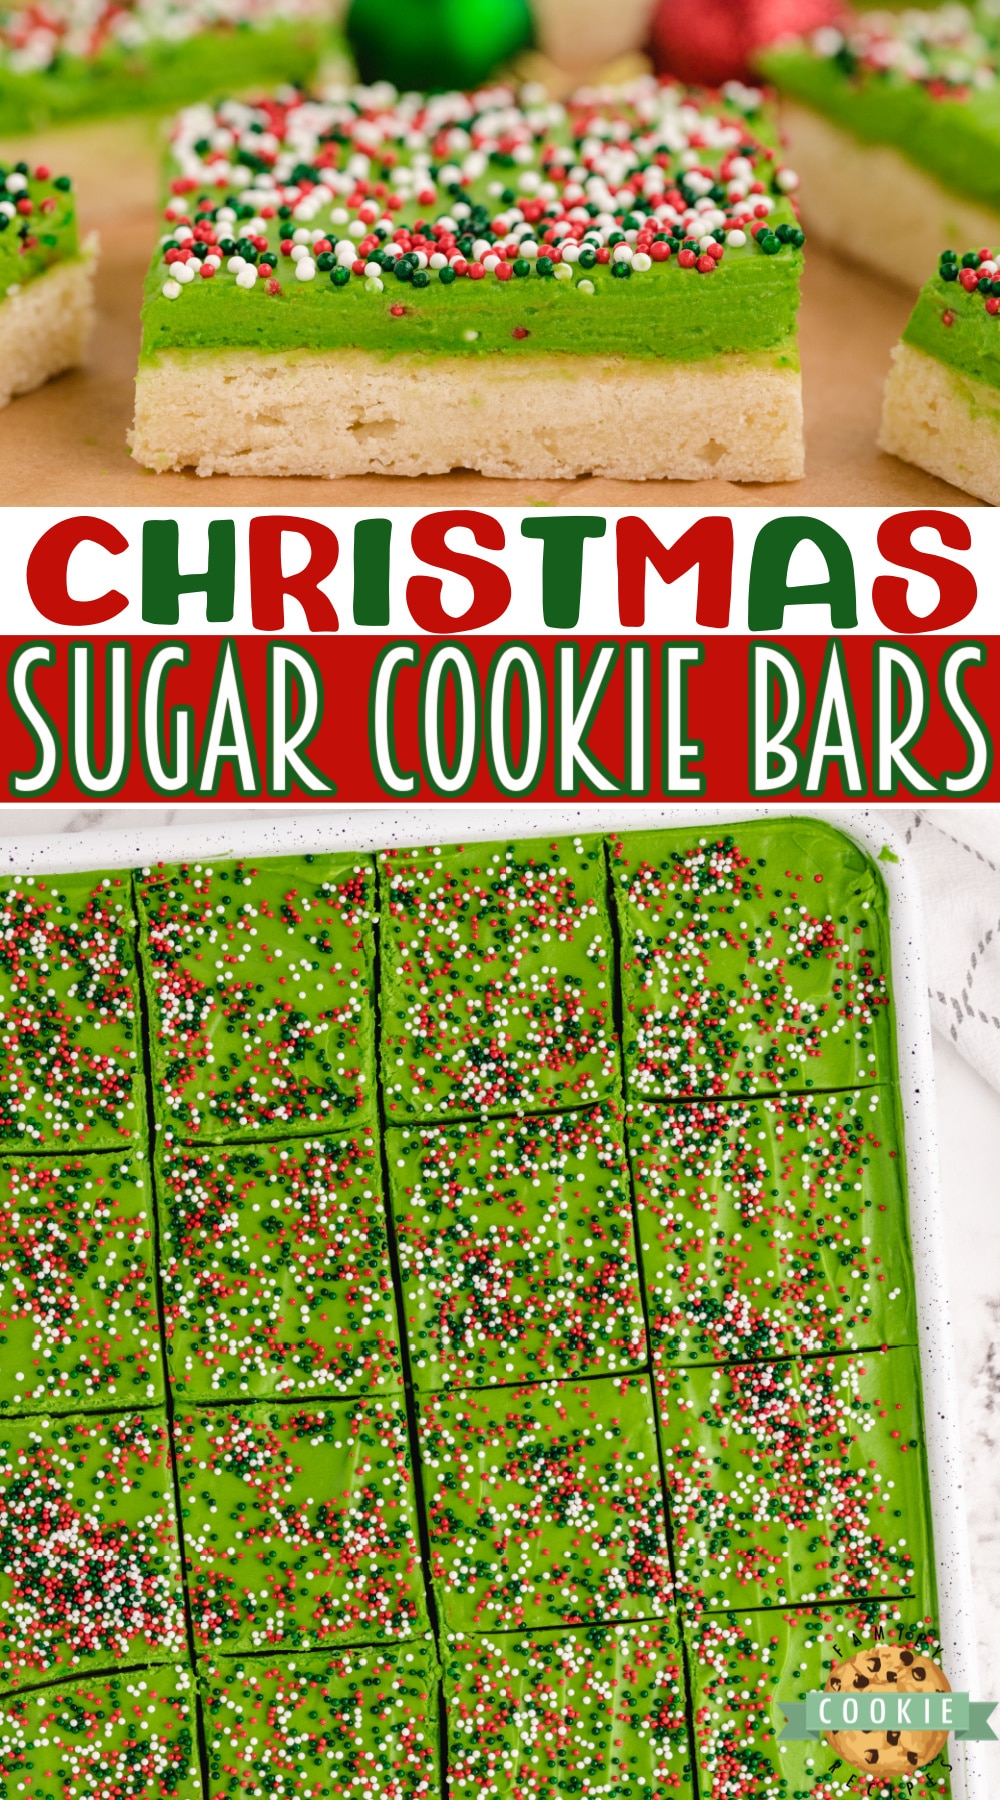 Christmas Sugar Cookie Bars are thick, soft and absolutely amazing! Best sugar cookie bar recipe that I've ever tried!